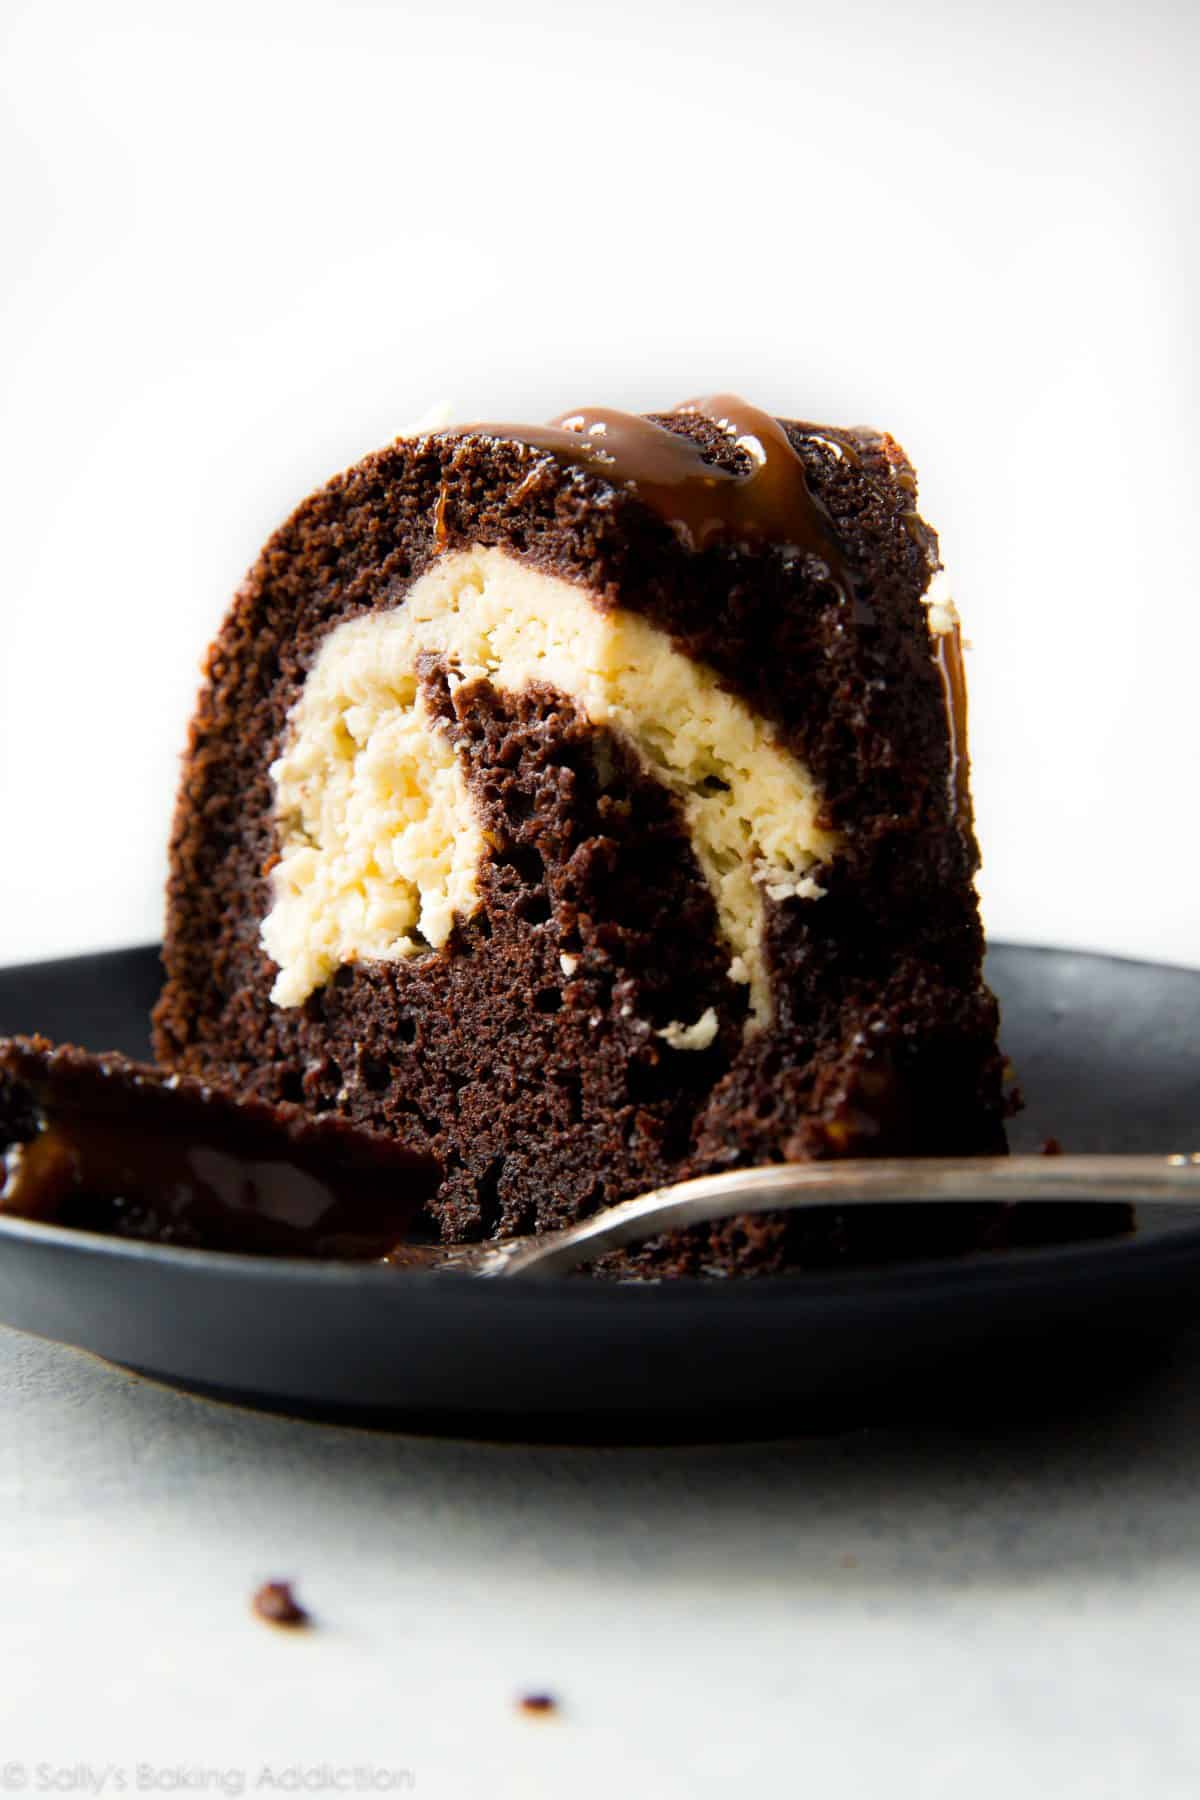 slice of chocolate cream cheese bundt cake on a black plate with a fork